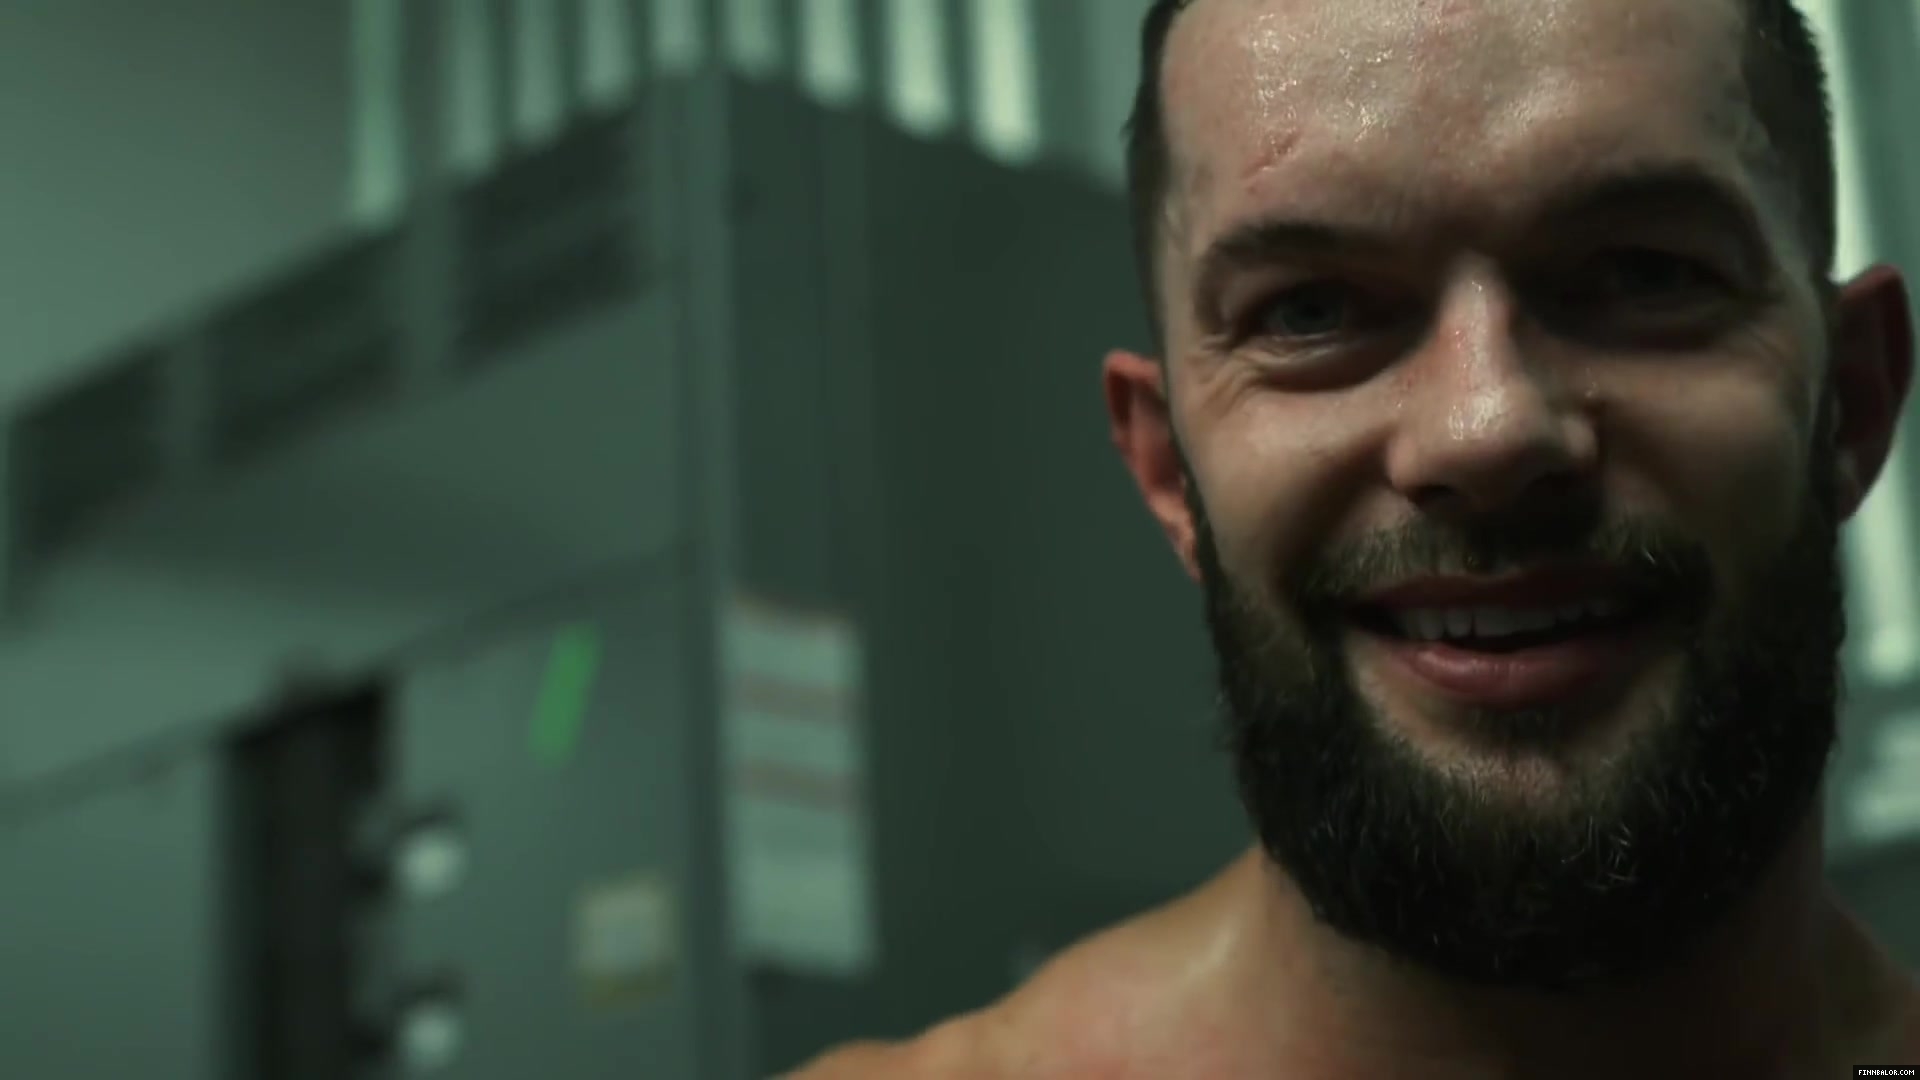 Finn_Balor___The_Rising_of_the_Prince_in_NXT_608.jpg